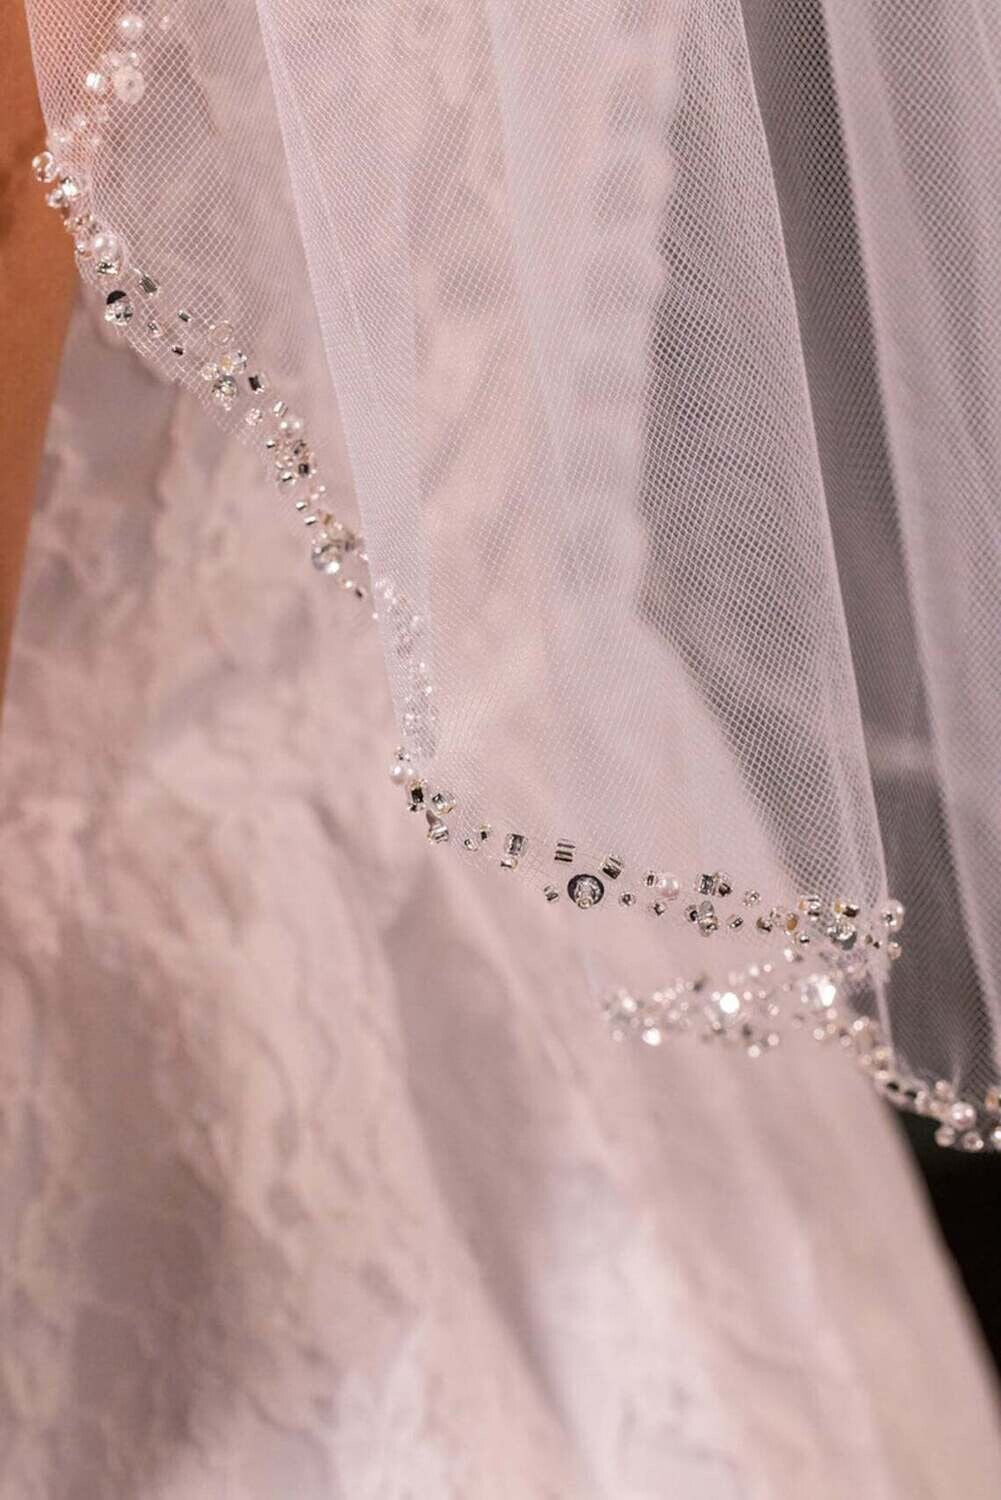 Enza crystal pearl edge with scattered crystal communion veil